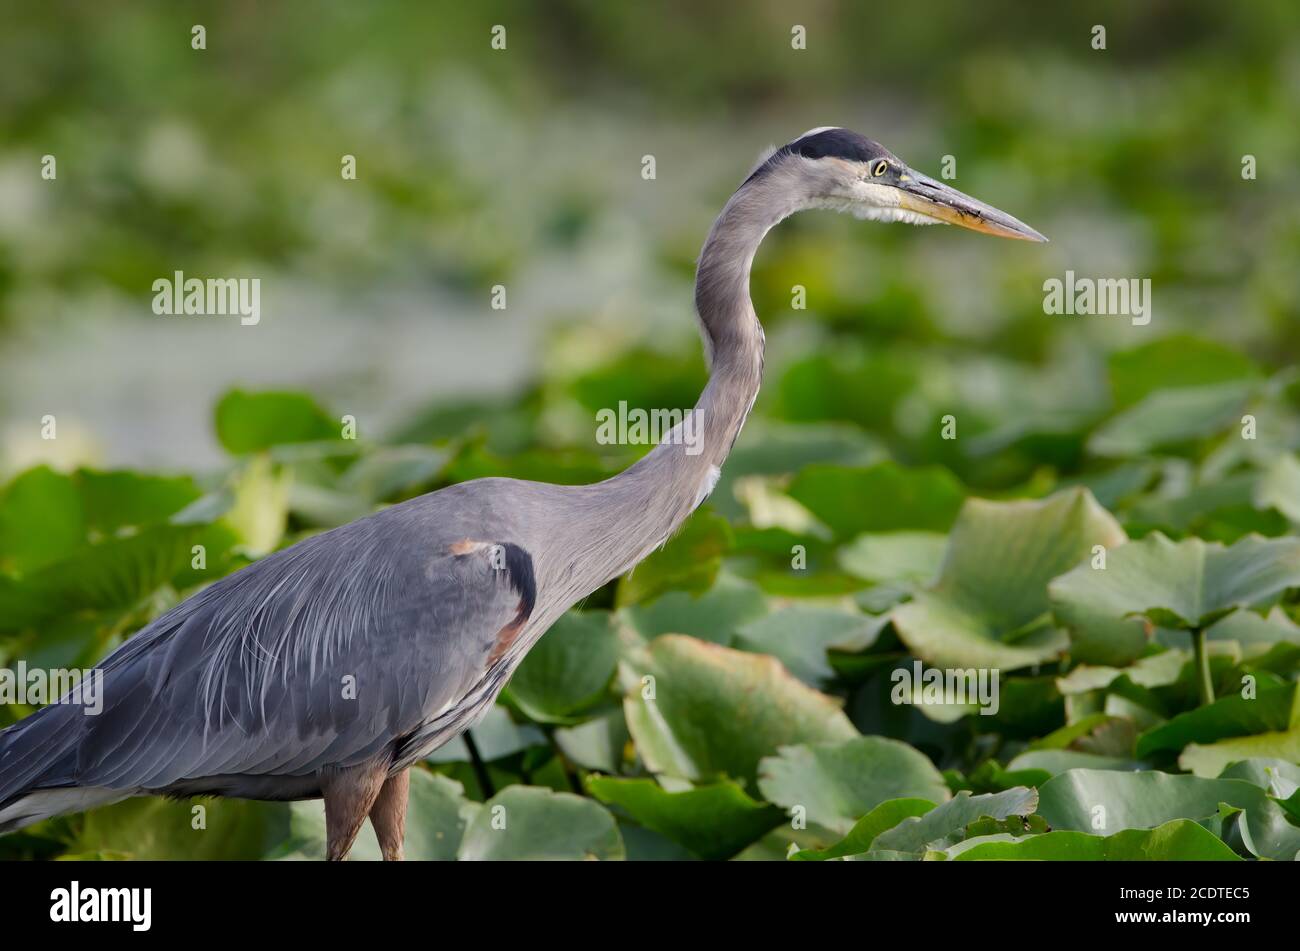 Close-up of a Great Blue Heron (Ardea herodias) in a marsh wetlands Stock Photo